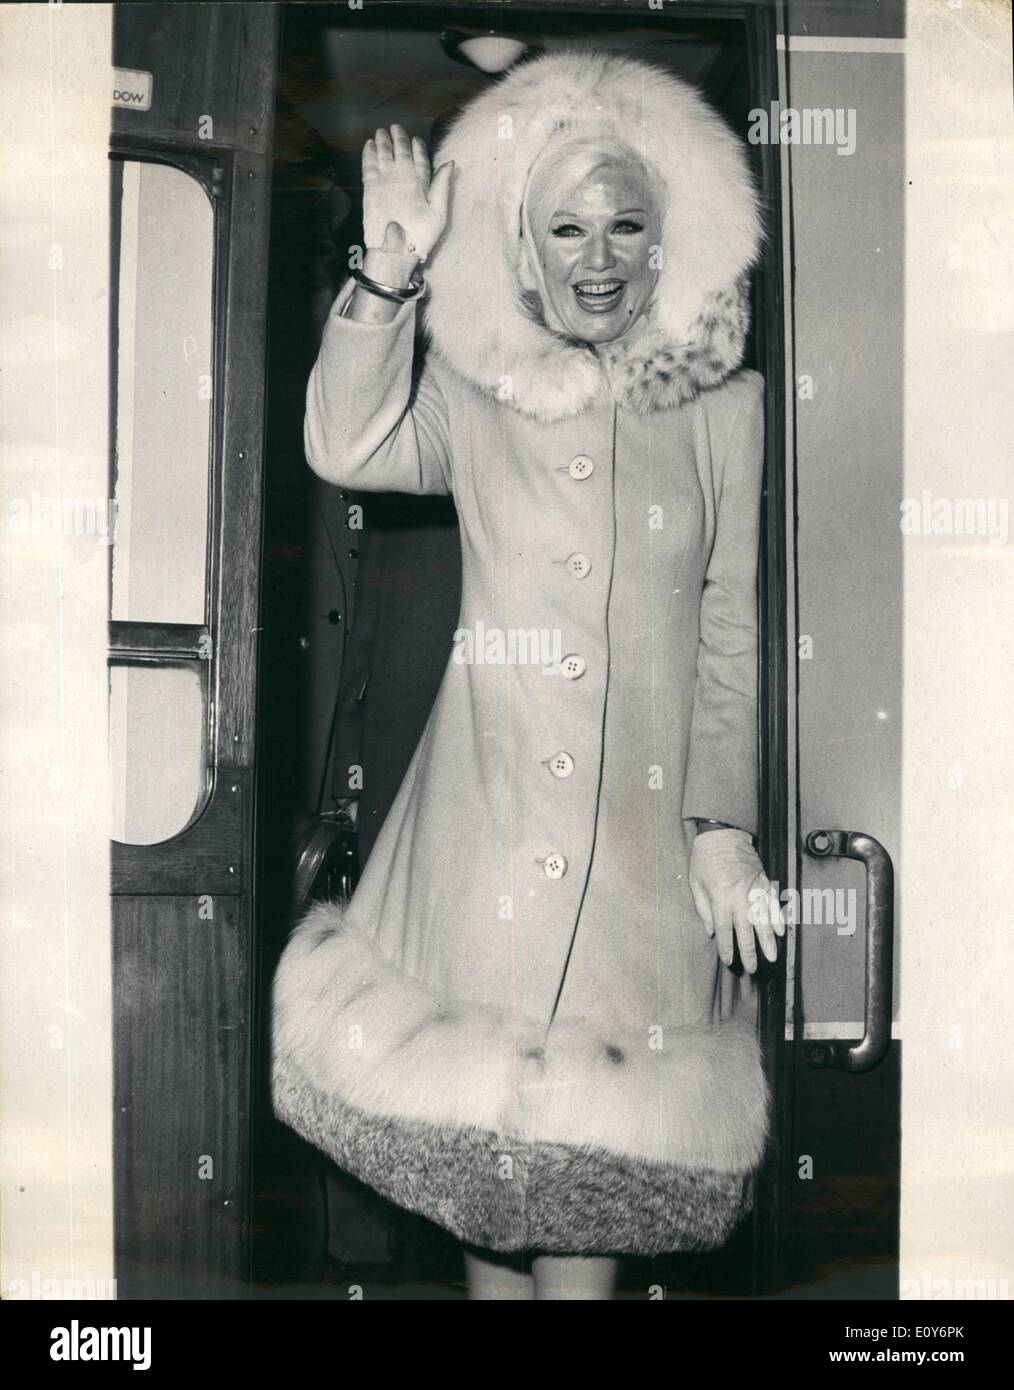 Dec. 12, 1968 - A V.I.P. reception for film star ginger rogers when she arrives in Britain to star In ''Name''. Ginger rogers, the 57- year old film star. was accorded a great reception when she arrived in Britain to make her first over stage appearance in the London production of the musical mame''. which opens at the theater Royal, Drury lane, on Feb. 20th, 1969. She was greeted at Southampton by a military band. Traveled down to Waterloo on a special train, named the Ginger Rogers ''Mame Express'' and was driven from the station to the Savoy hotel in a horse drawn open carriage Stock Photo